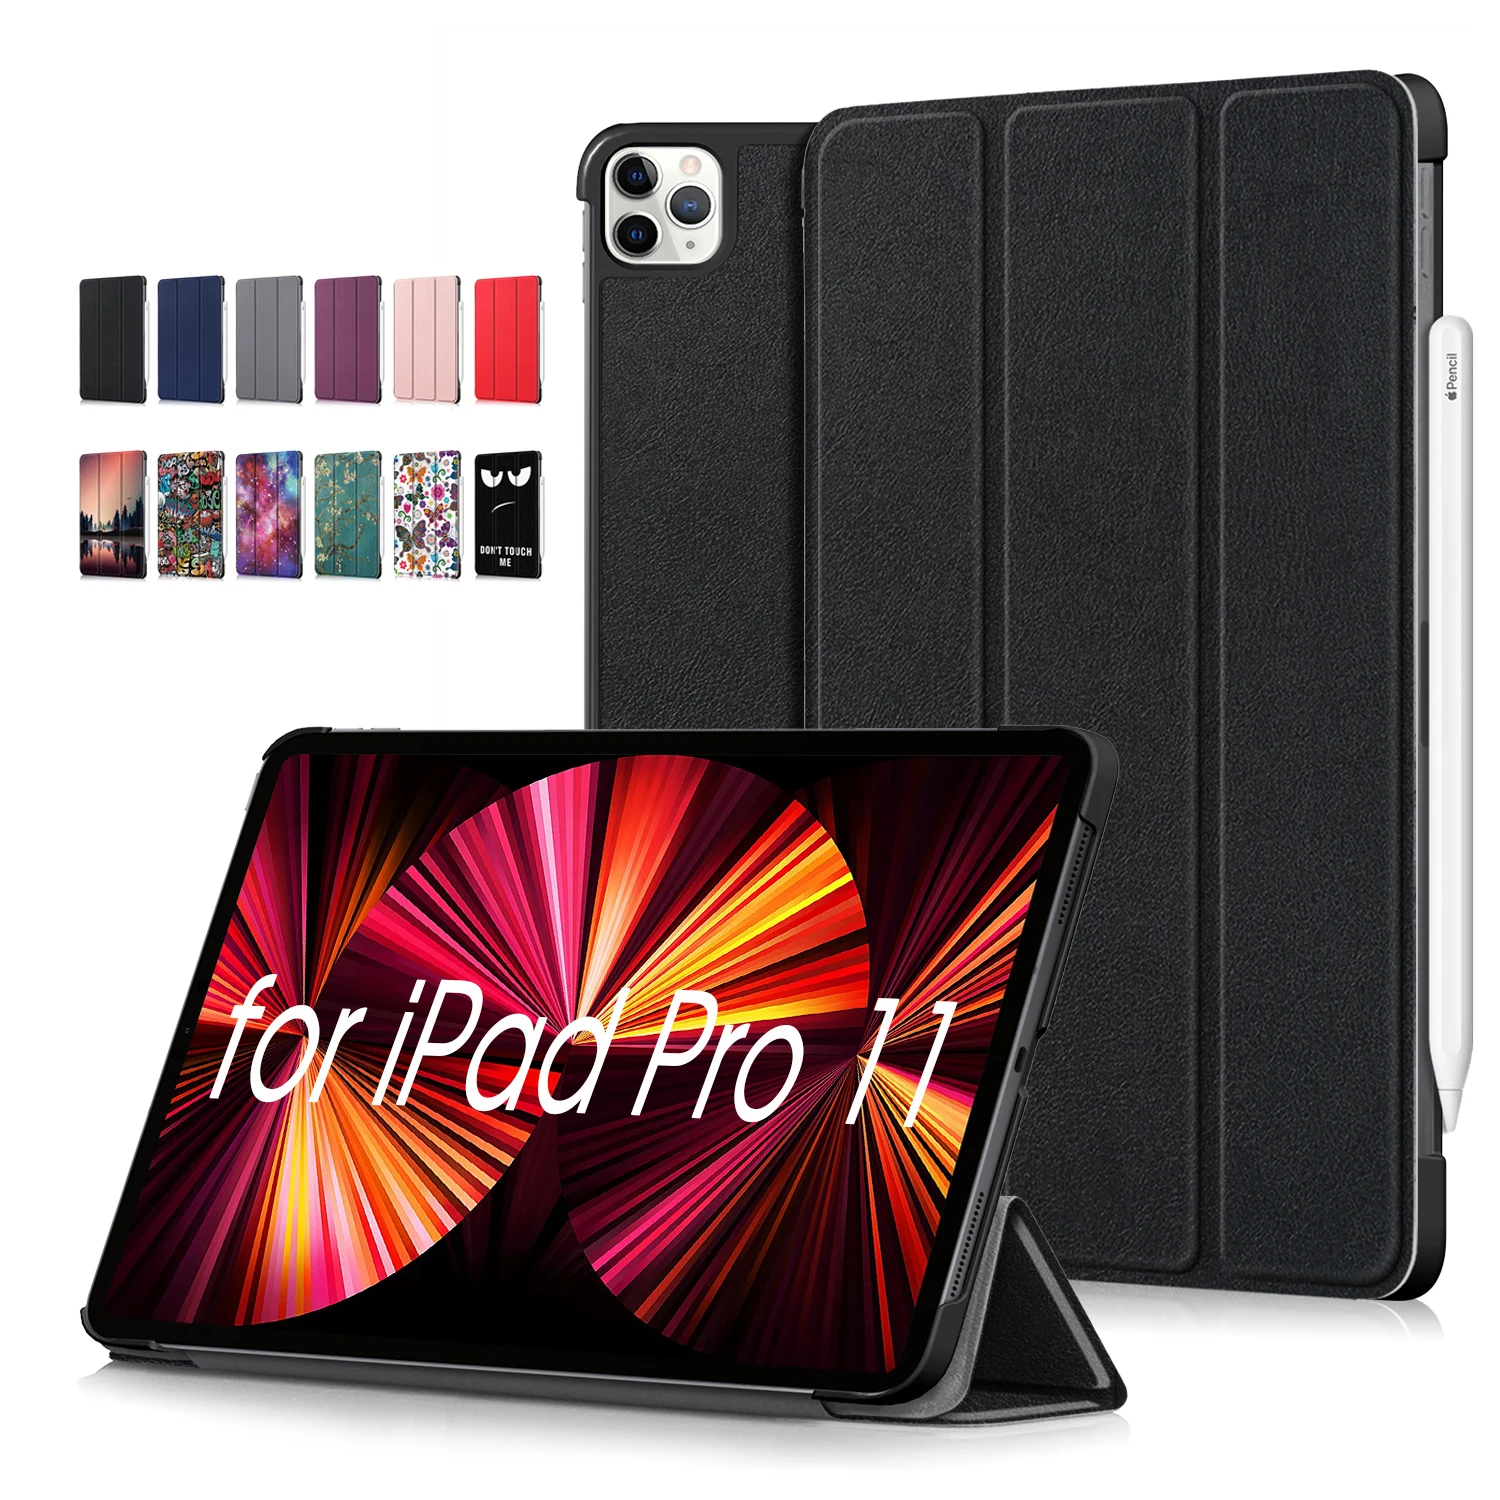 For iPad Pro 11 Case 2021 3rd Gen,Fits iPad Pro 11 2018 2020 tablet,Multi Angle Magnetic Back Cover for iPad Air 4 2020 Case